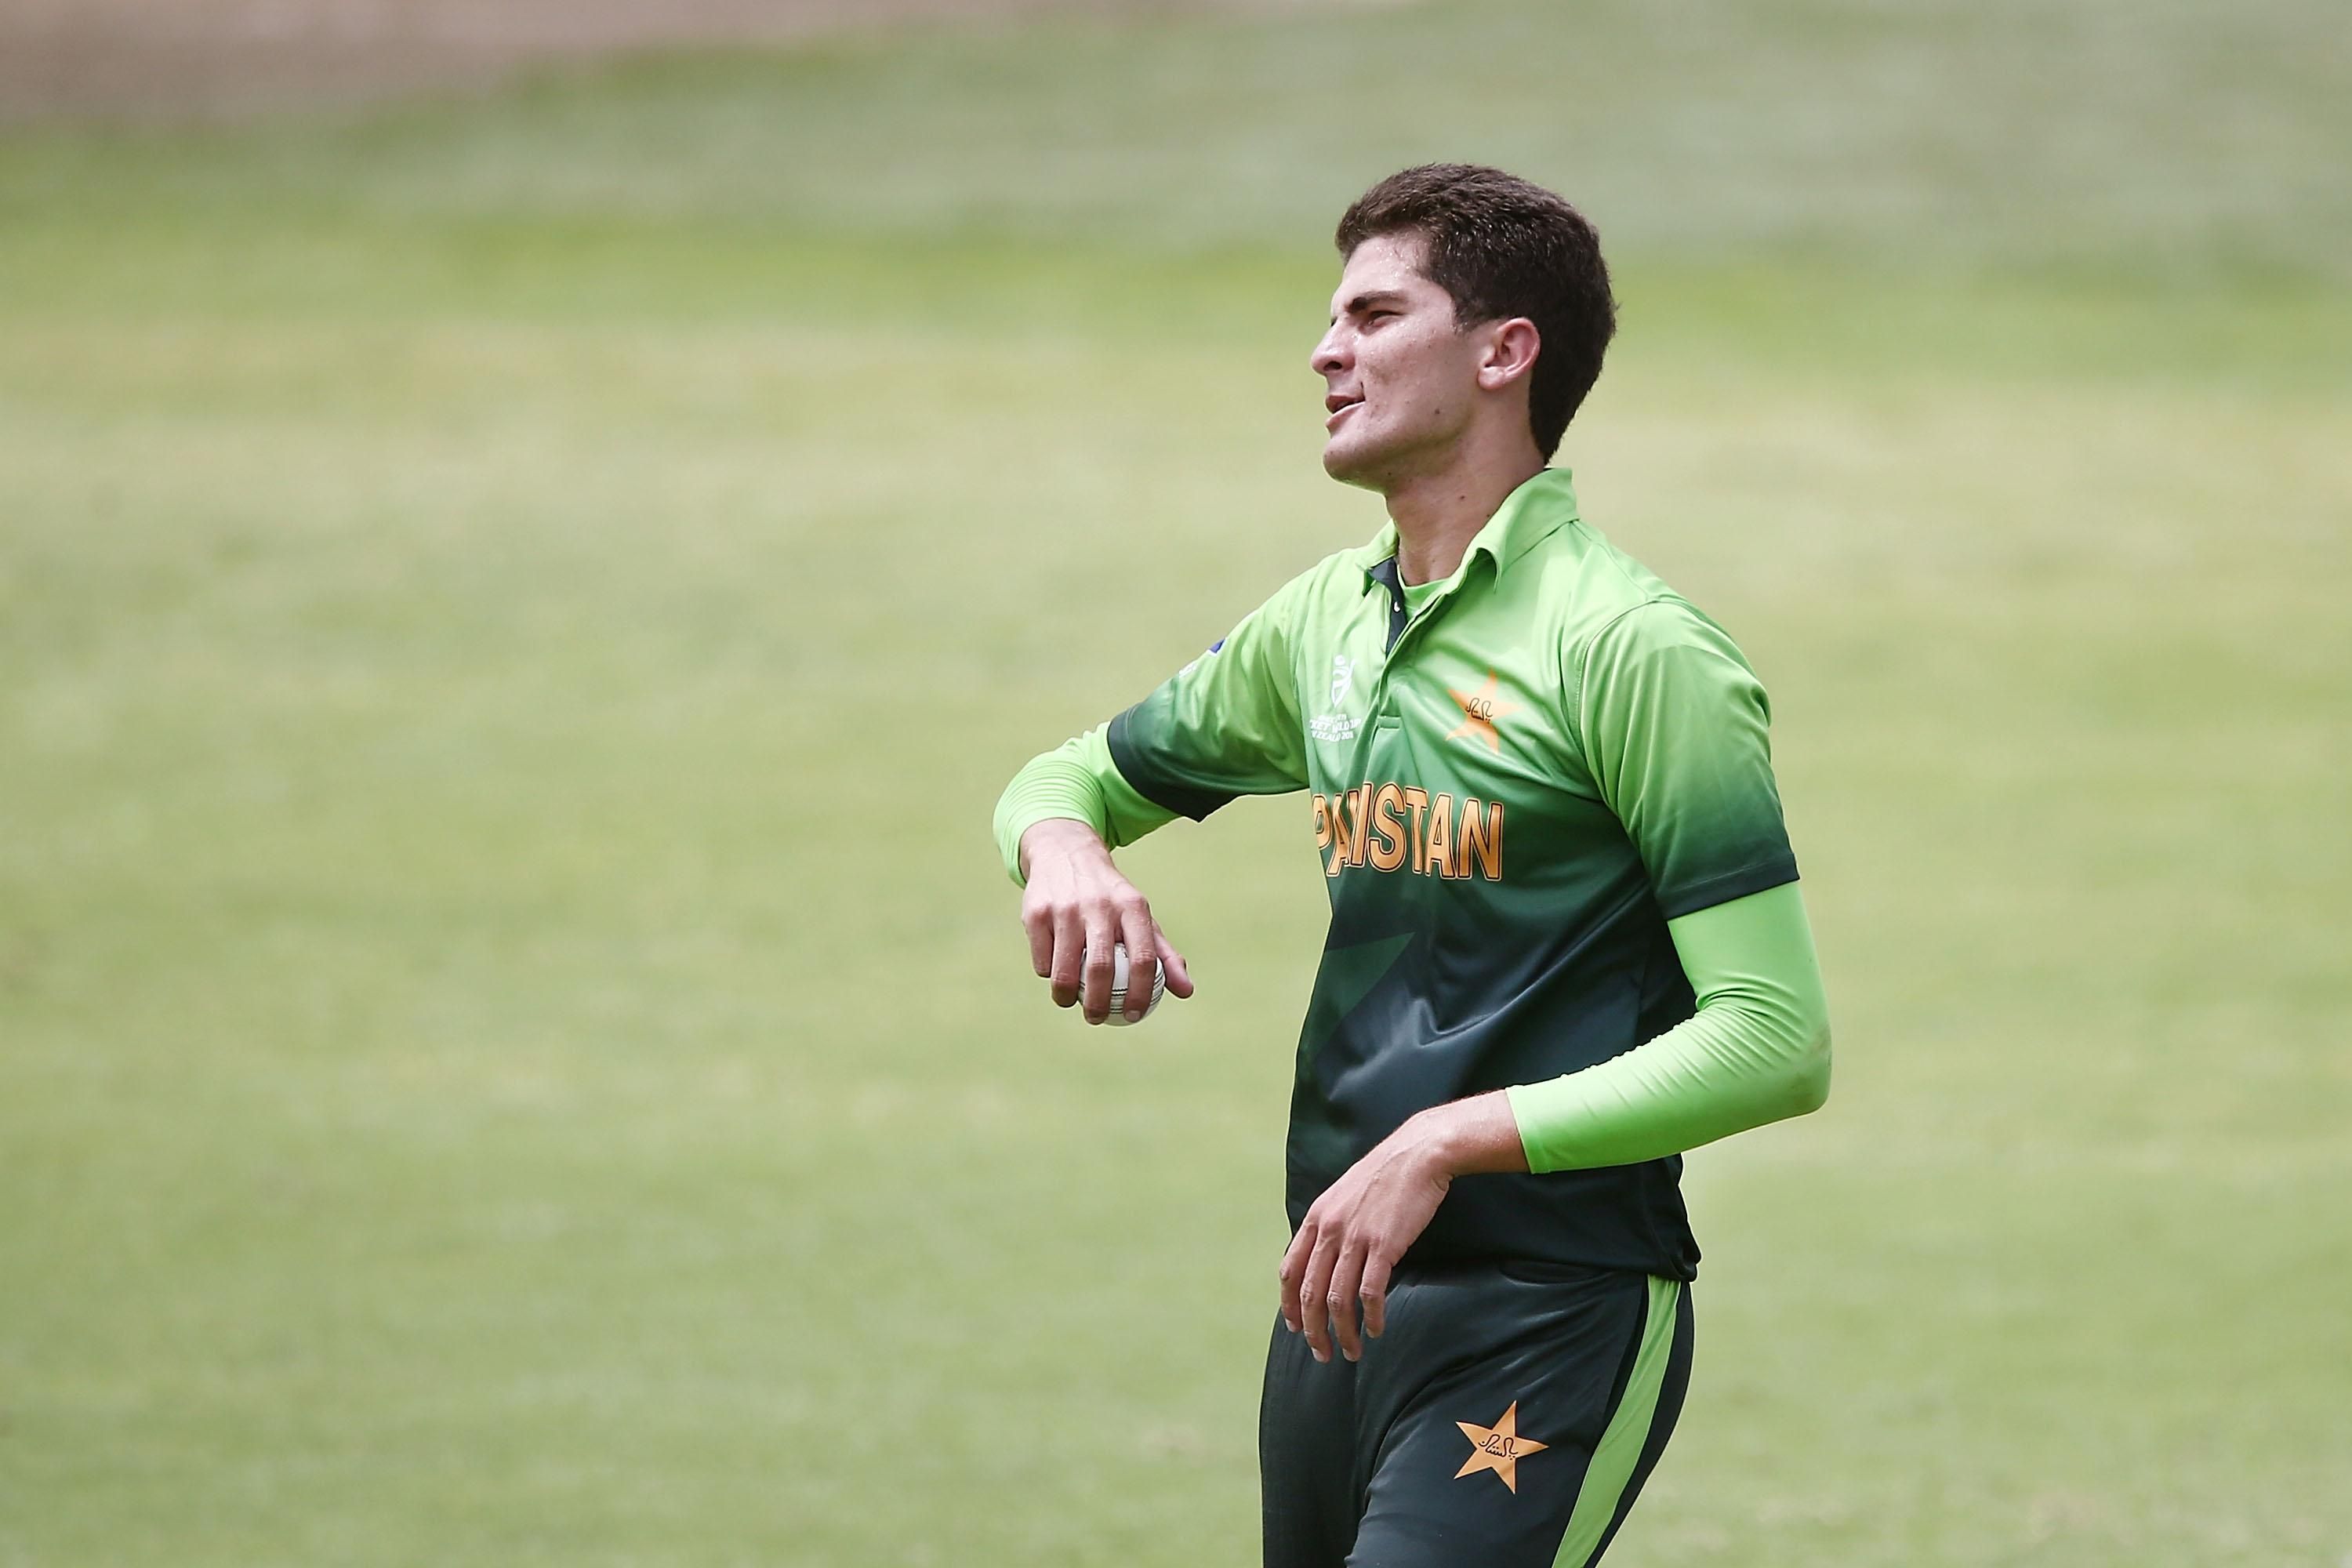 The rapid rise of Shaheen Shah Afridi